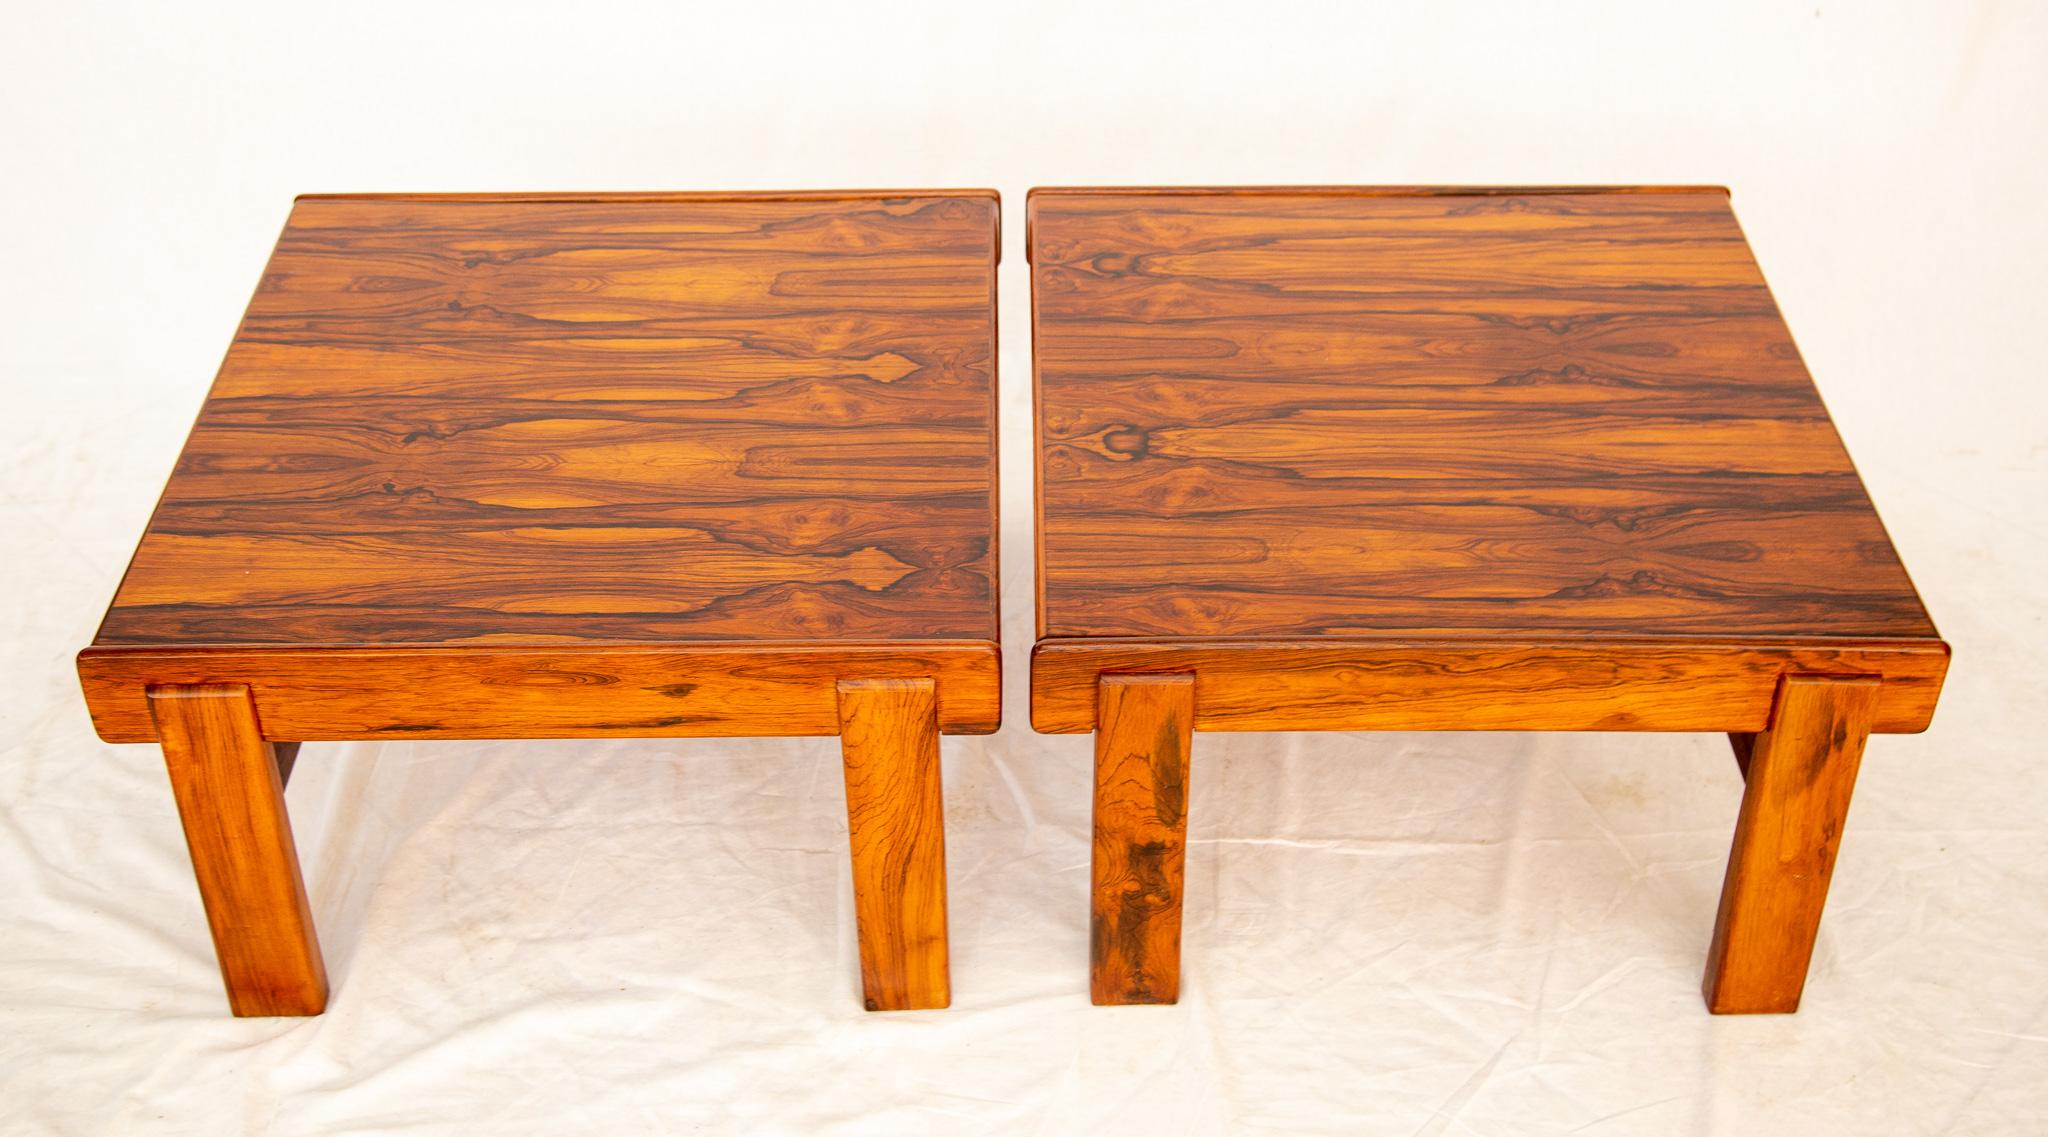 Midcentury Modern Side Table set in Hardwood by Jean Gillon, 1960s For Sale 7